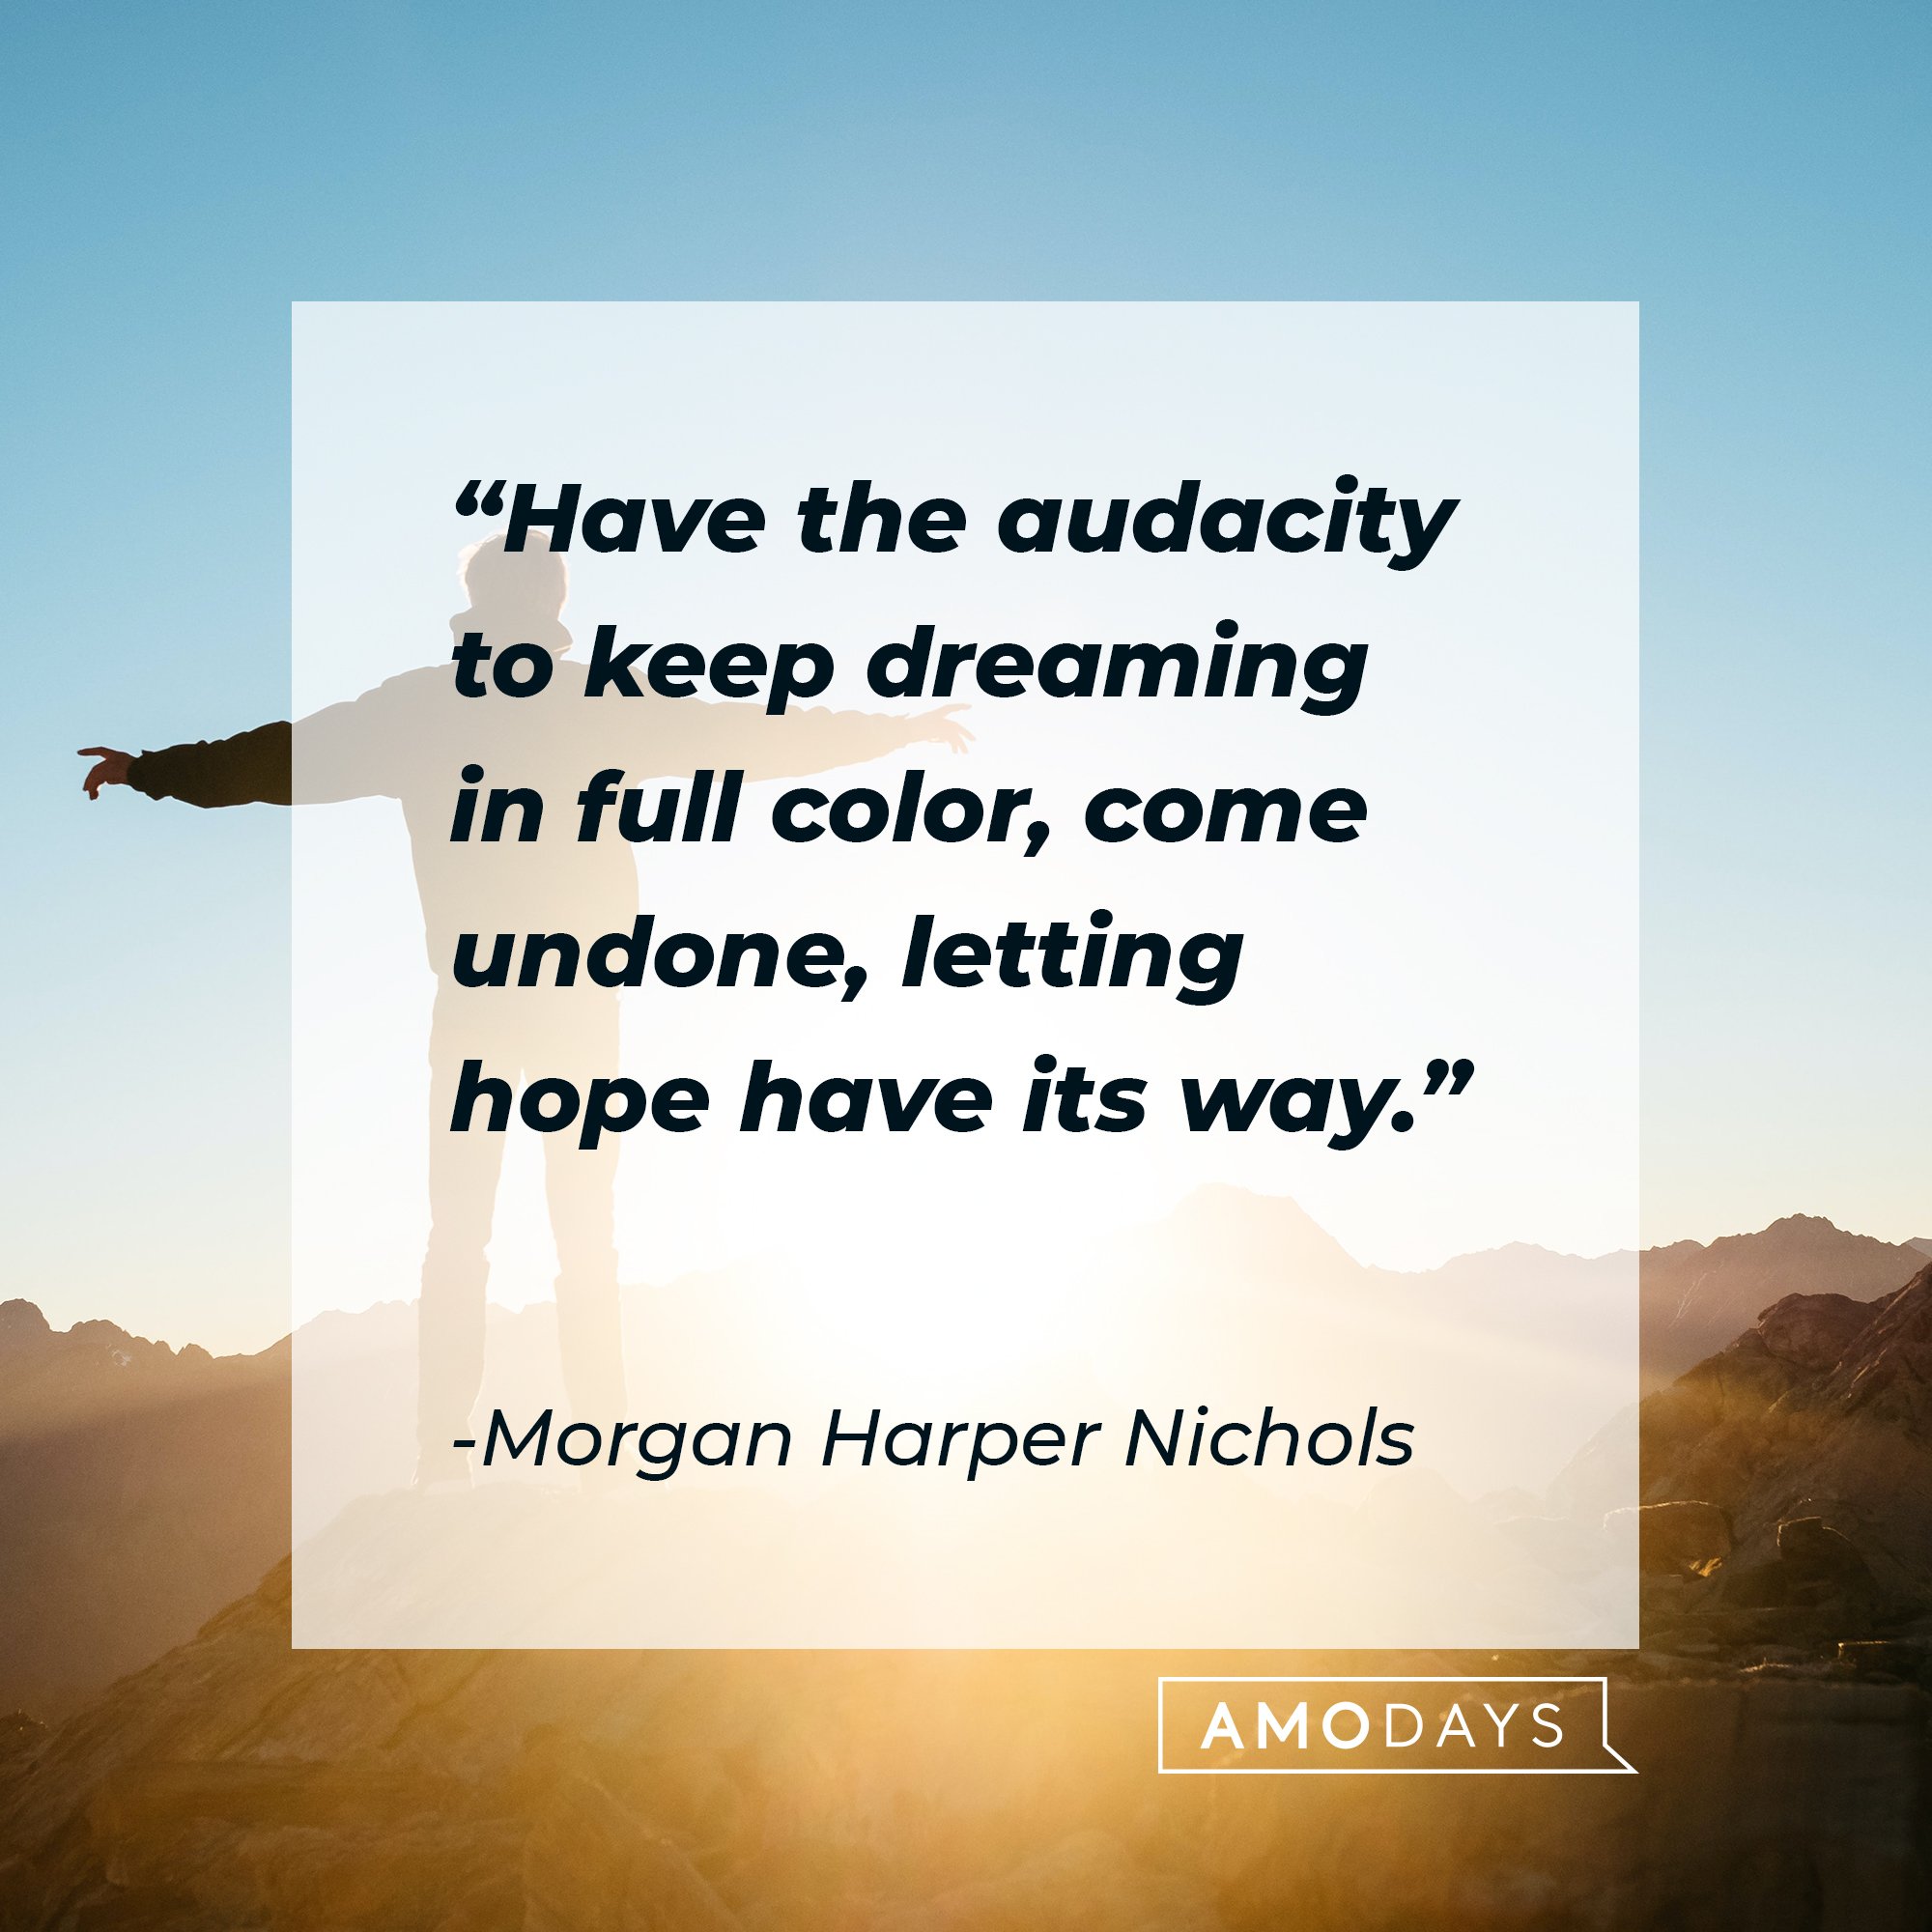  Morgan Harper Nichols’ quote: "Have the audacity to keep dreaming in full color, come undone, letting hope have its way." | Image: AmoDays